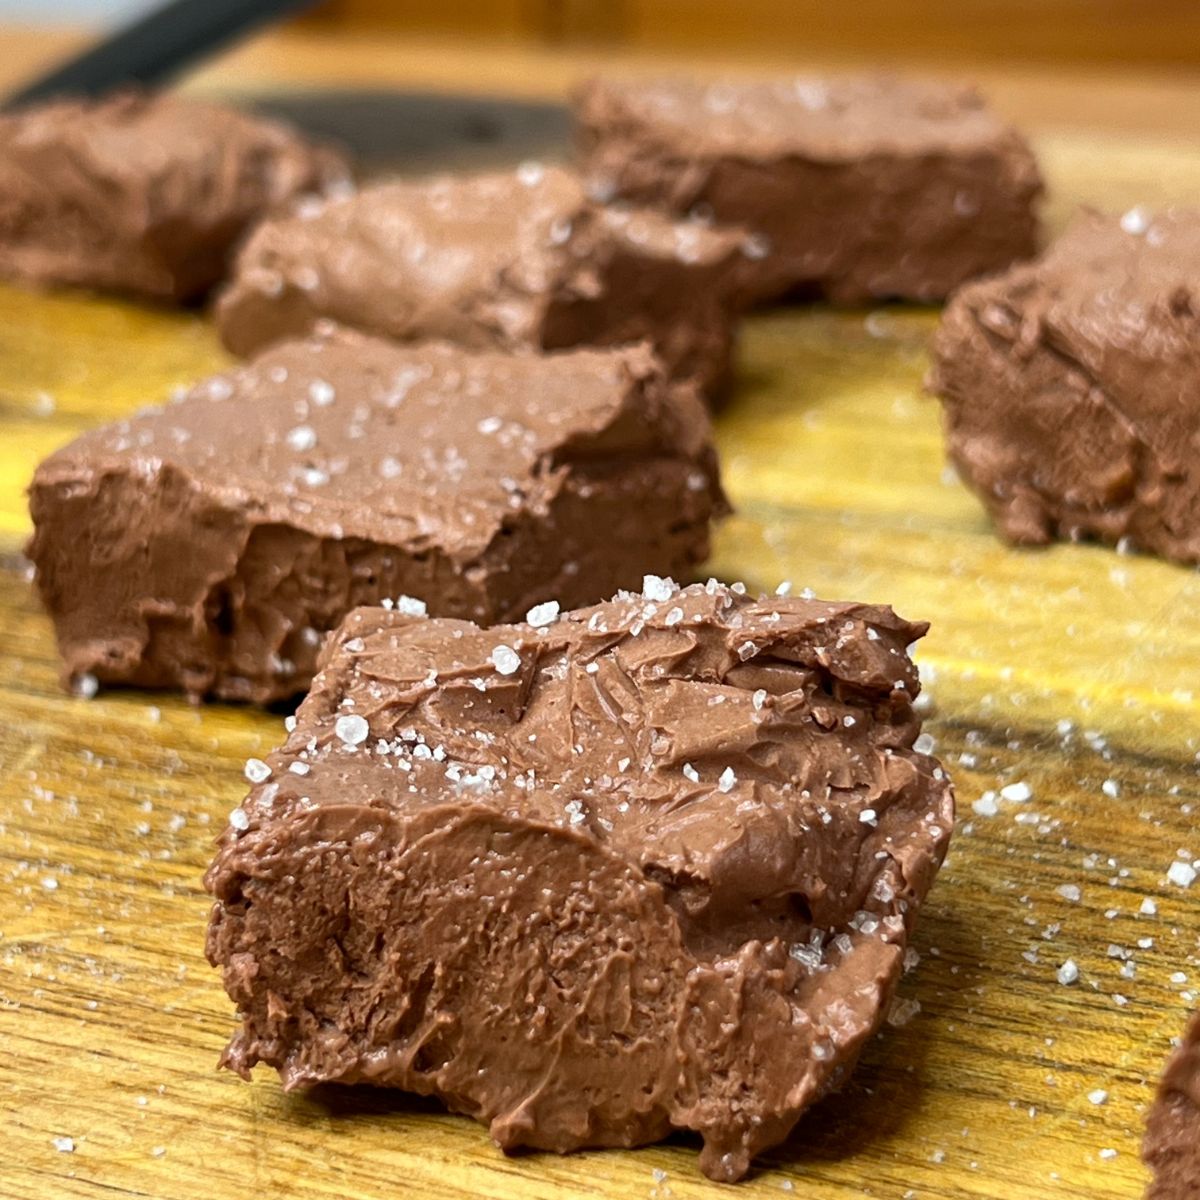 Weight Watchers chocolate fudge squares on a wooden cutting board